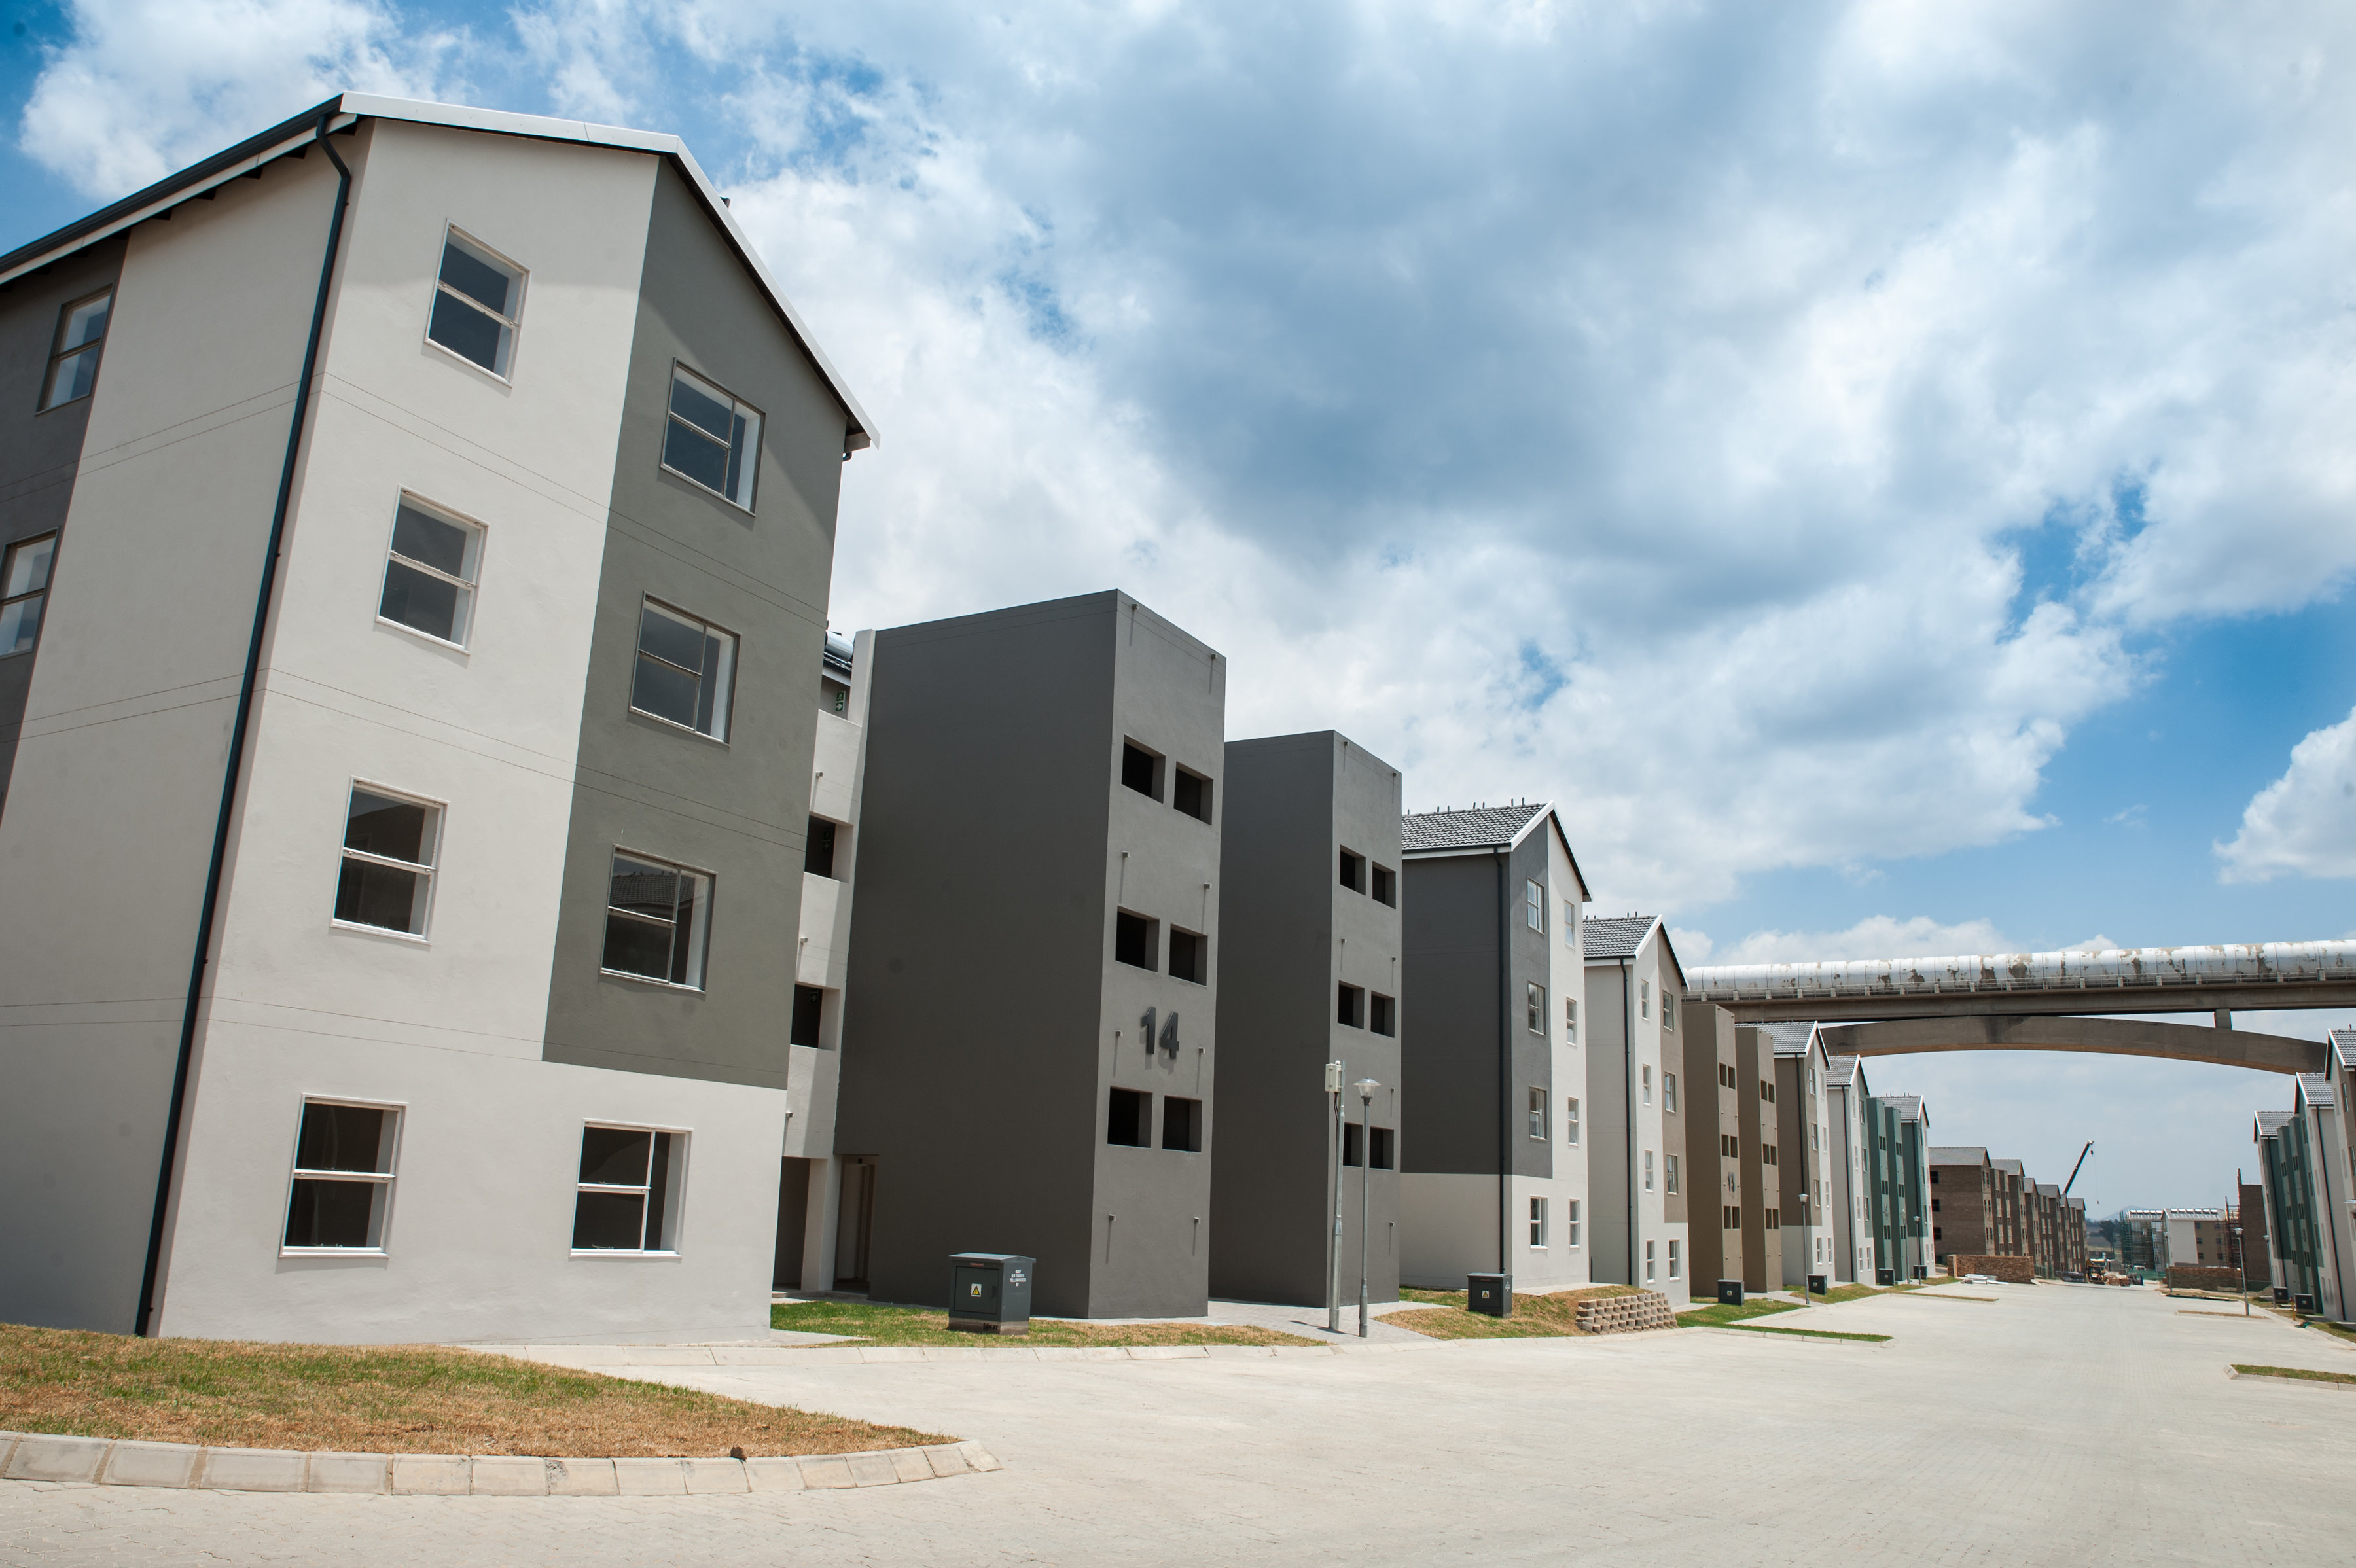 Raubex completes quality RDP multi-storey's at Riverside View